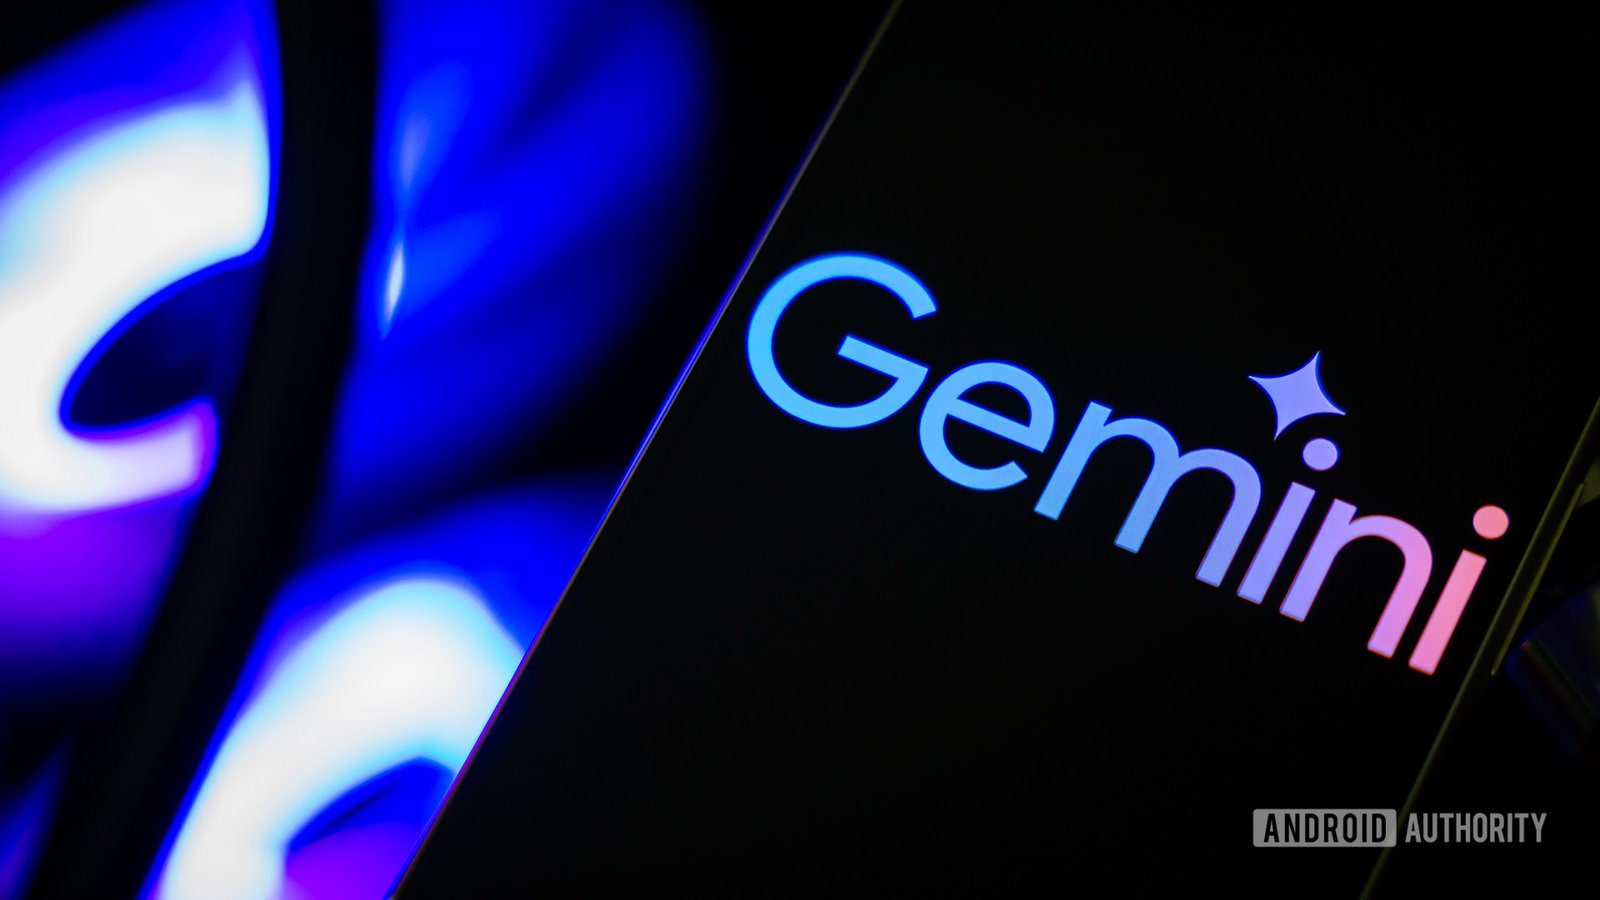 You no longer need a Pixel or Galaxy phone to get Gemini in Messages